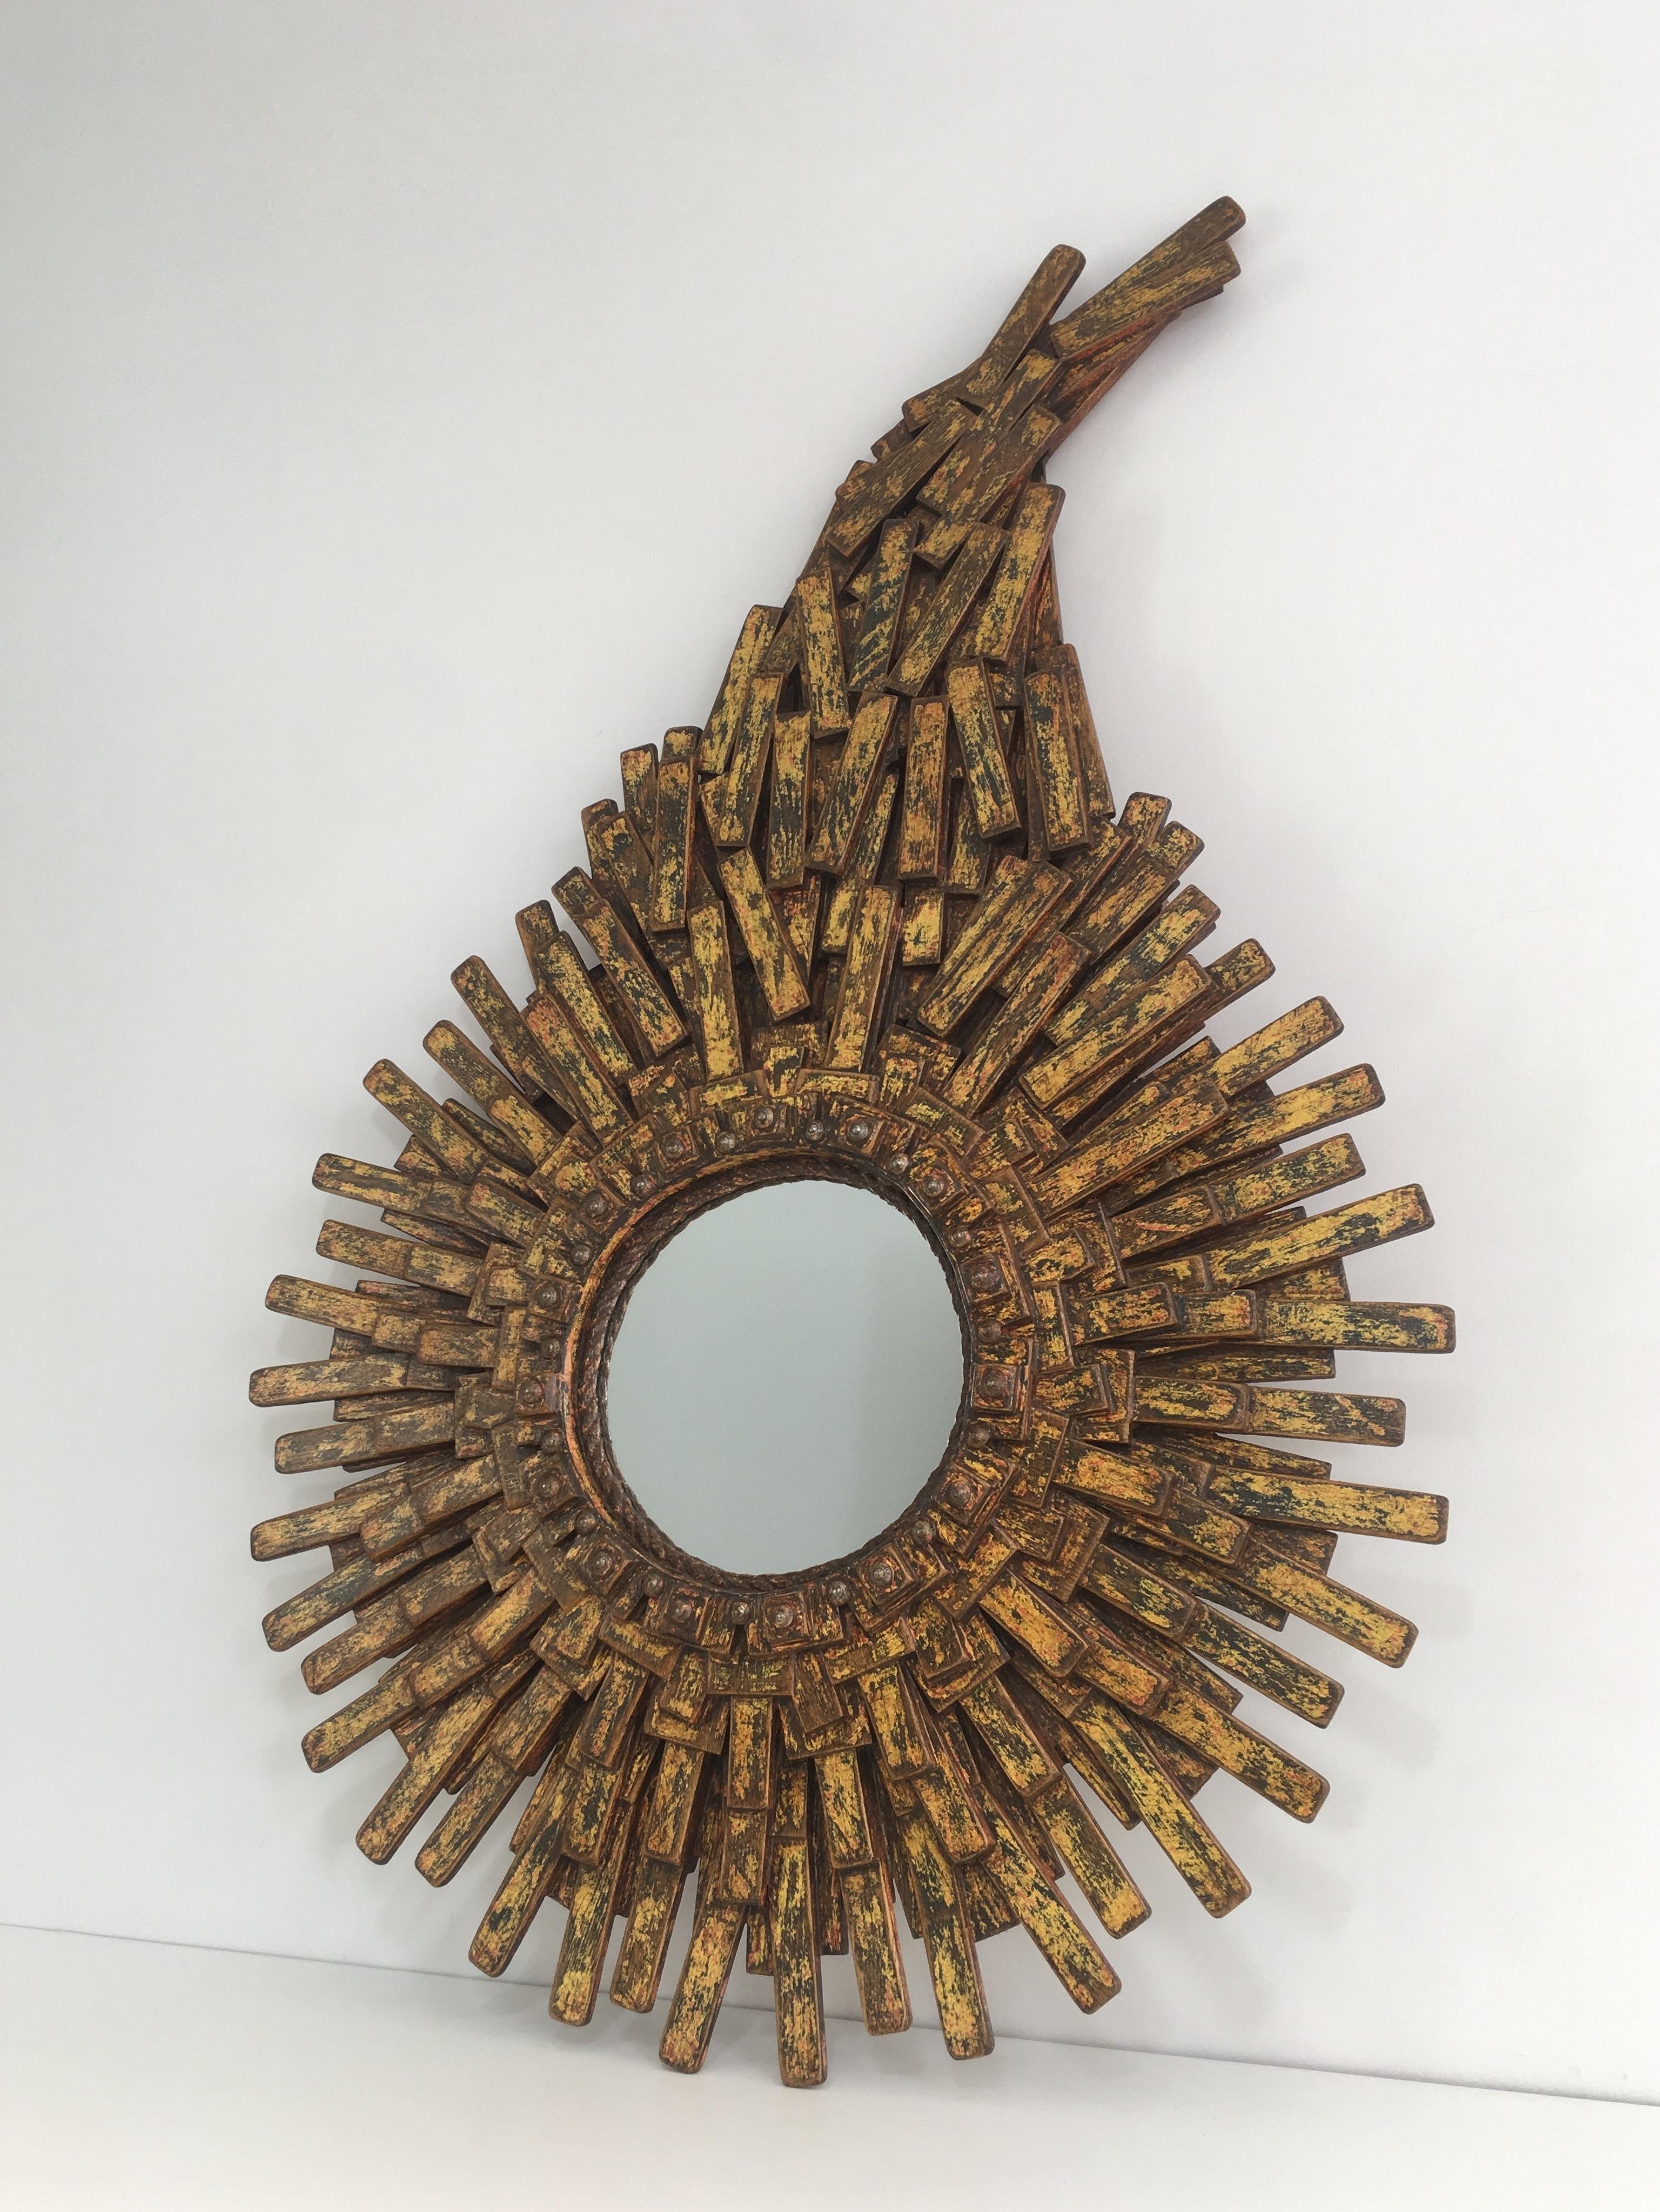 Unique Brutalist Mirror Made of Painted Wood, Rope & Old Iron Nails, Signed Arbo For Sale 13